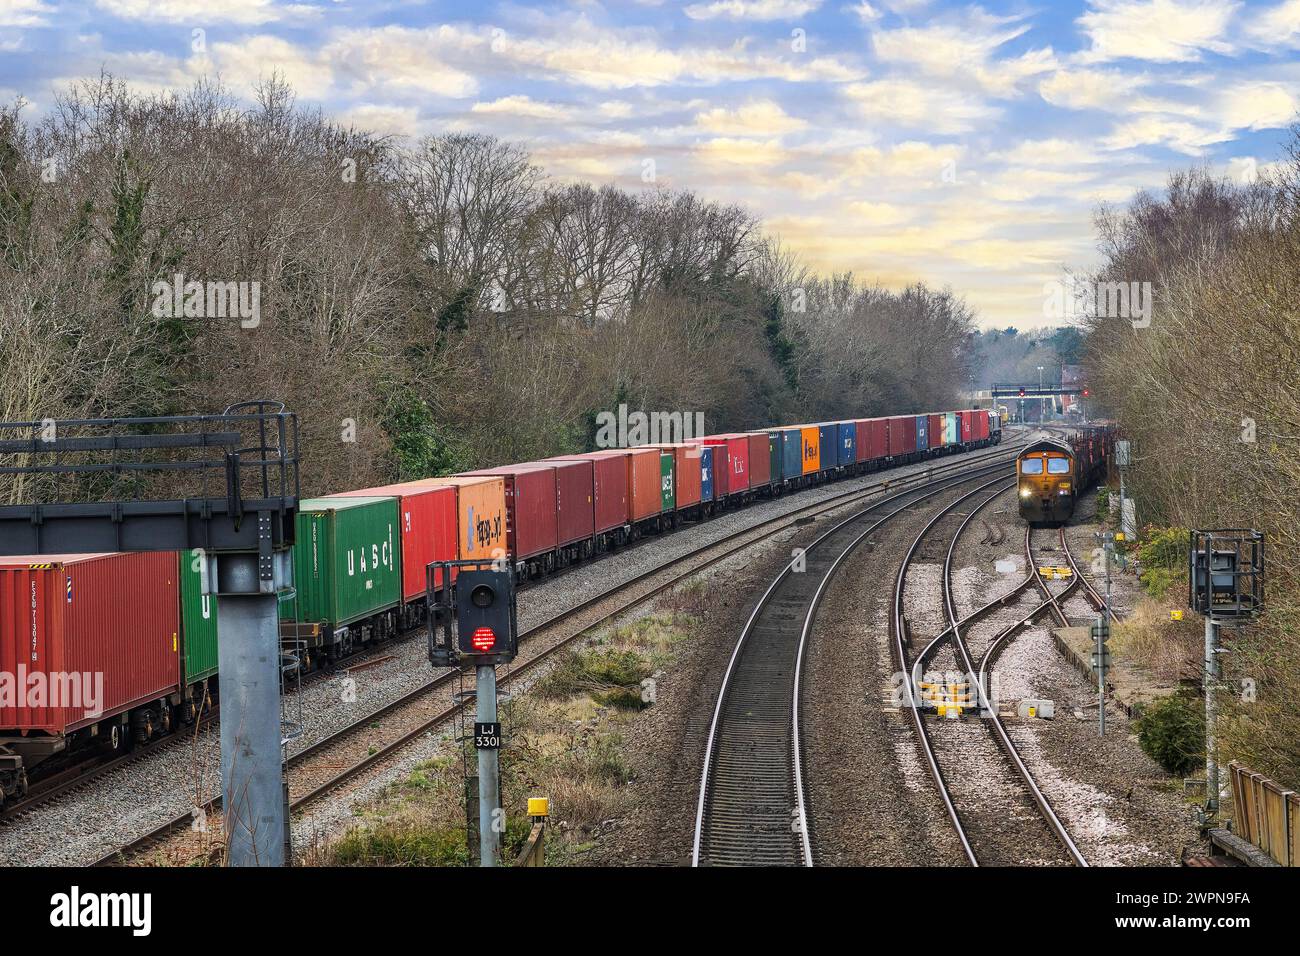 Afreight train is passing through Dorridge station west midlands England UK. Carrying goods containers imports exports. Stock Photo